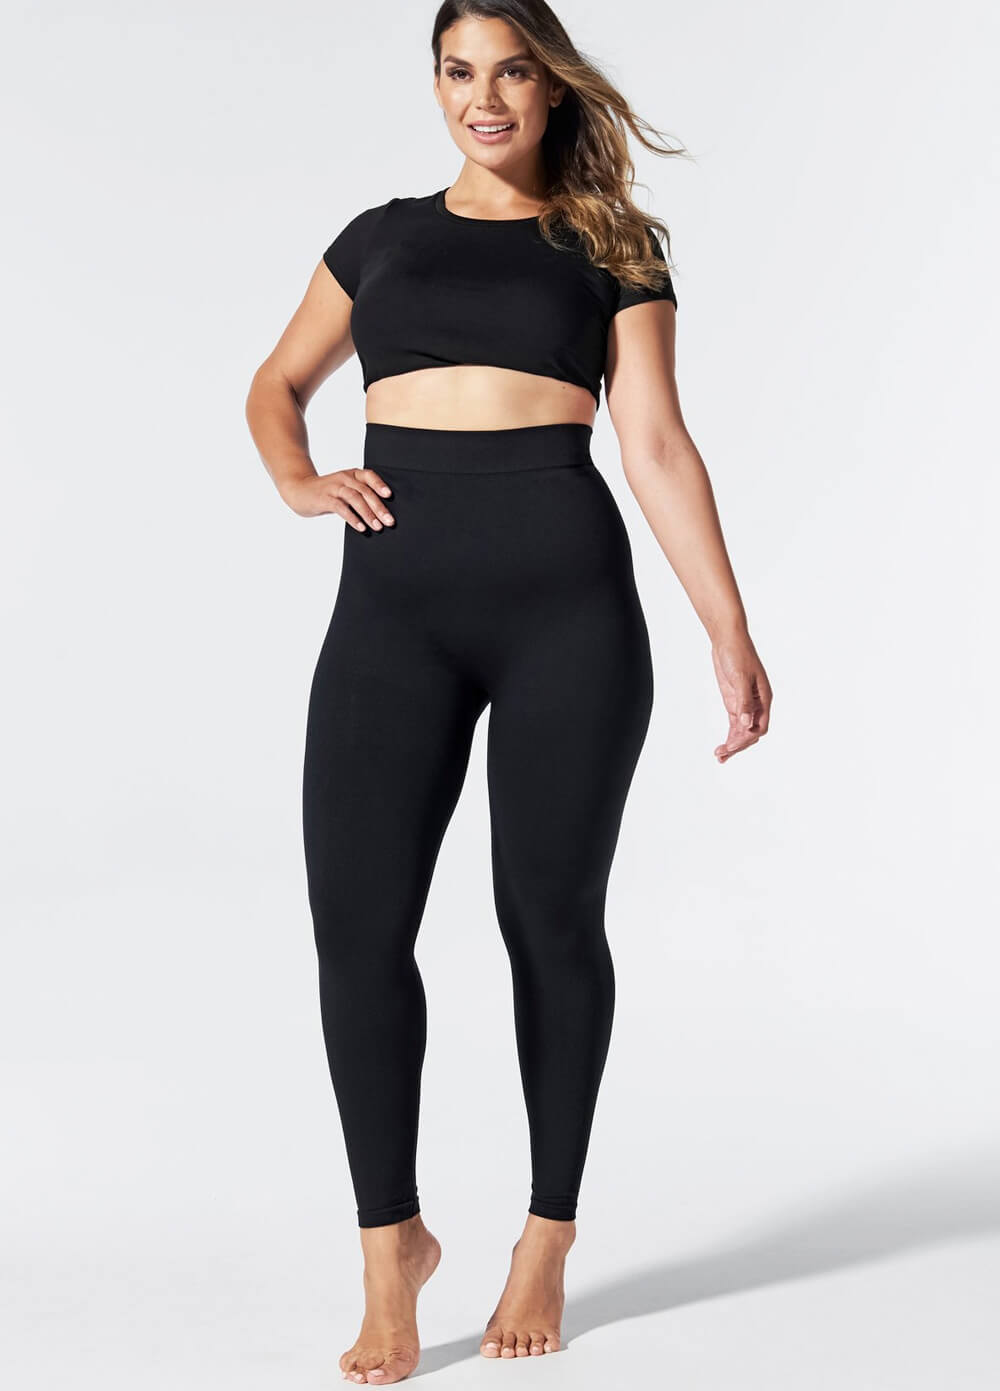 High Waist Postpartum Support Leggings in Black by Blanqi